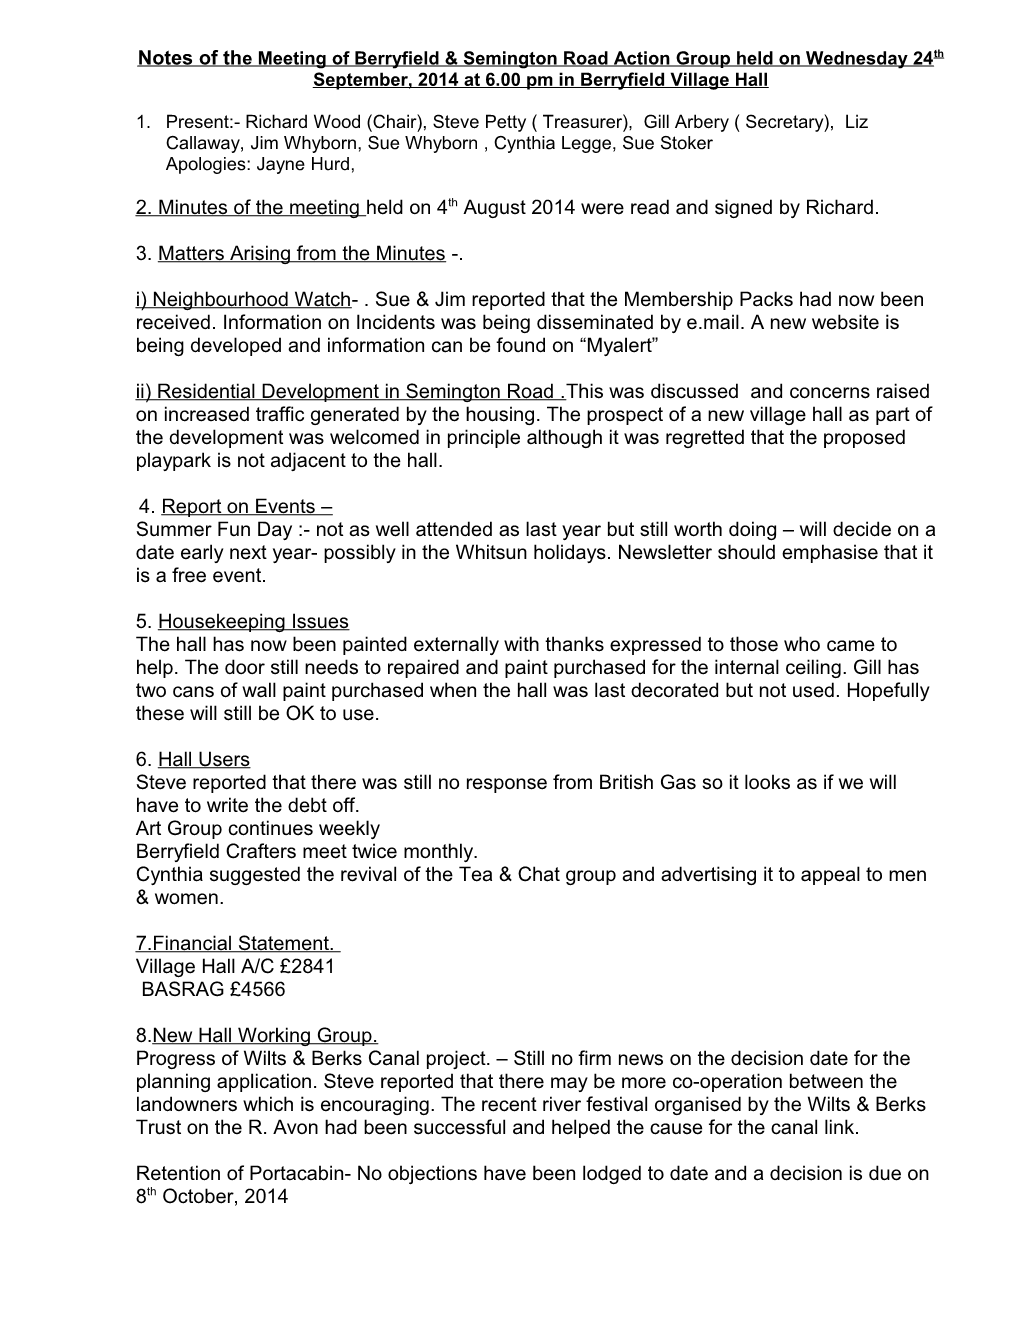 Notes of the Meeting of Berryfield & Semington Road Action Group Held on 11Th August 2009